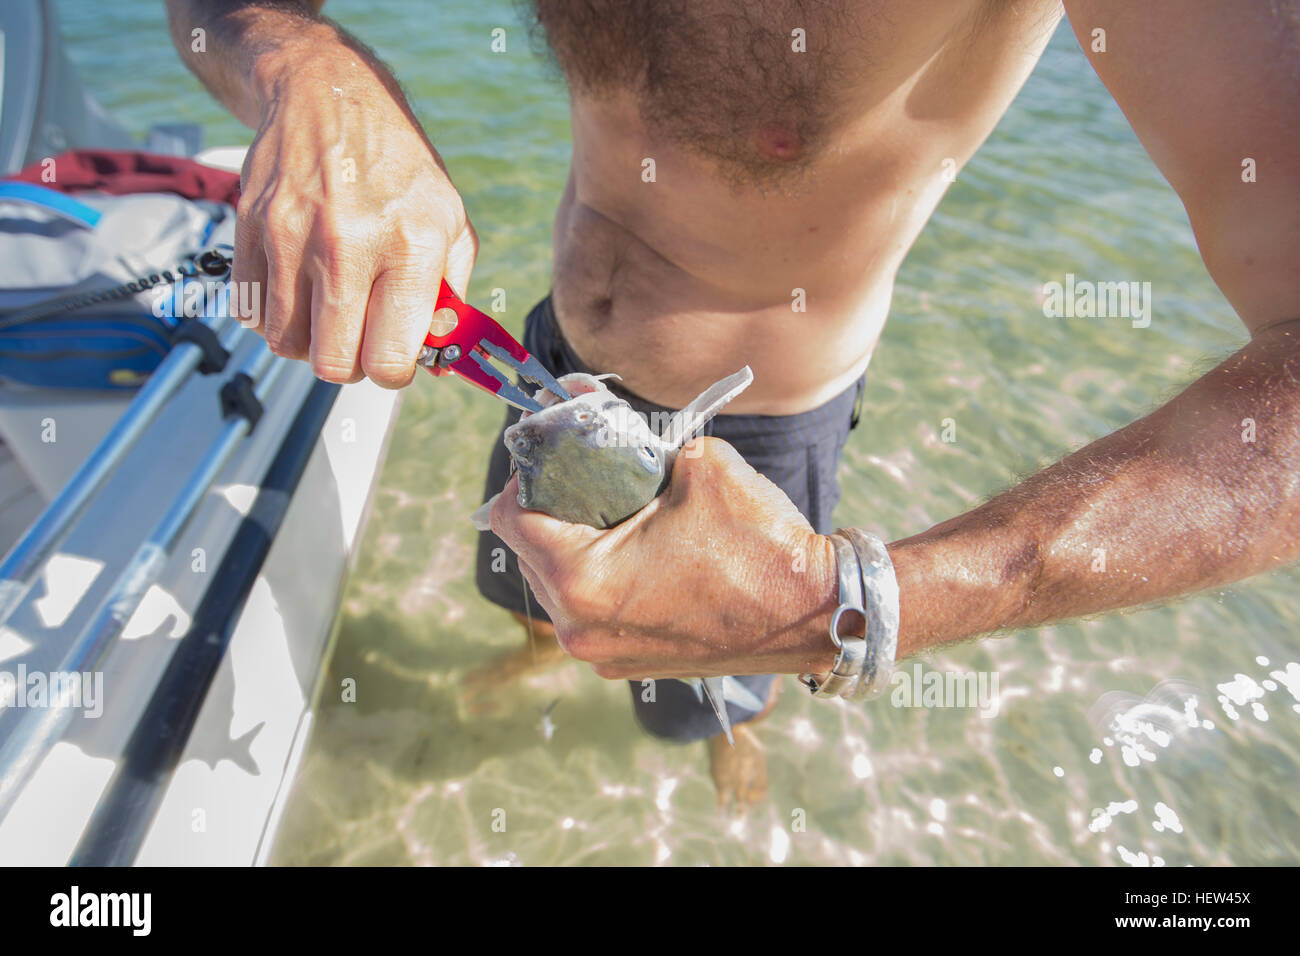 Man pulling hook from fish's mouth after being caught, mid section, Fort Walton Beach, Florida, USA Stock Photo